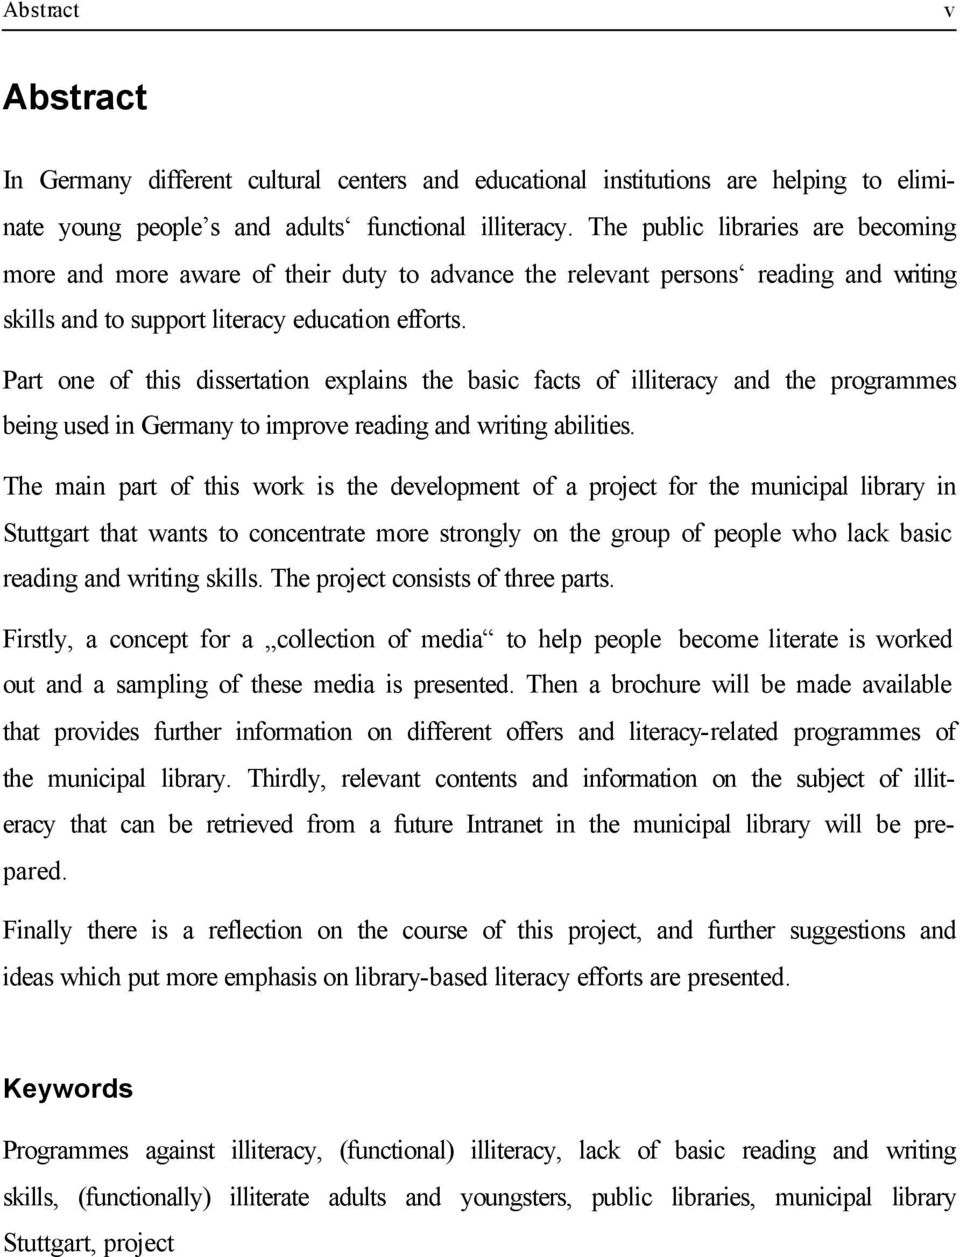 Part one of this dissertation explains the basic facts of illiteracy and the programmes being used in Germany to improve reading and writing abilities.